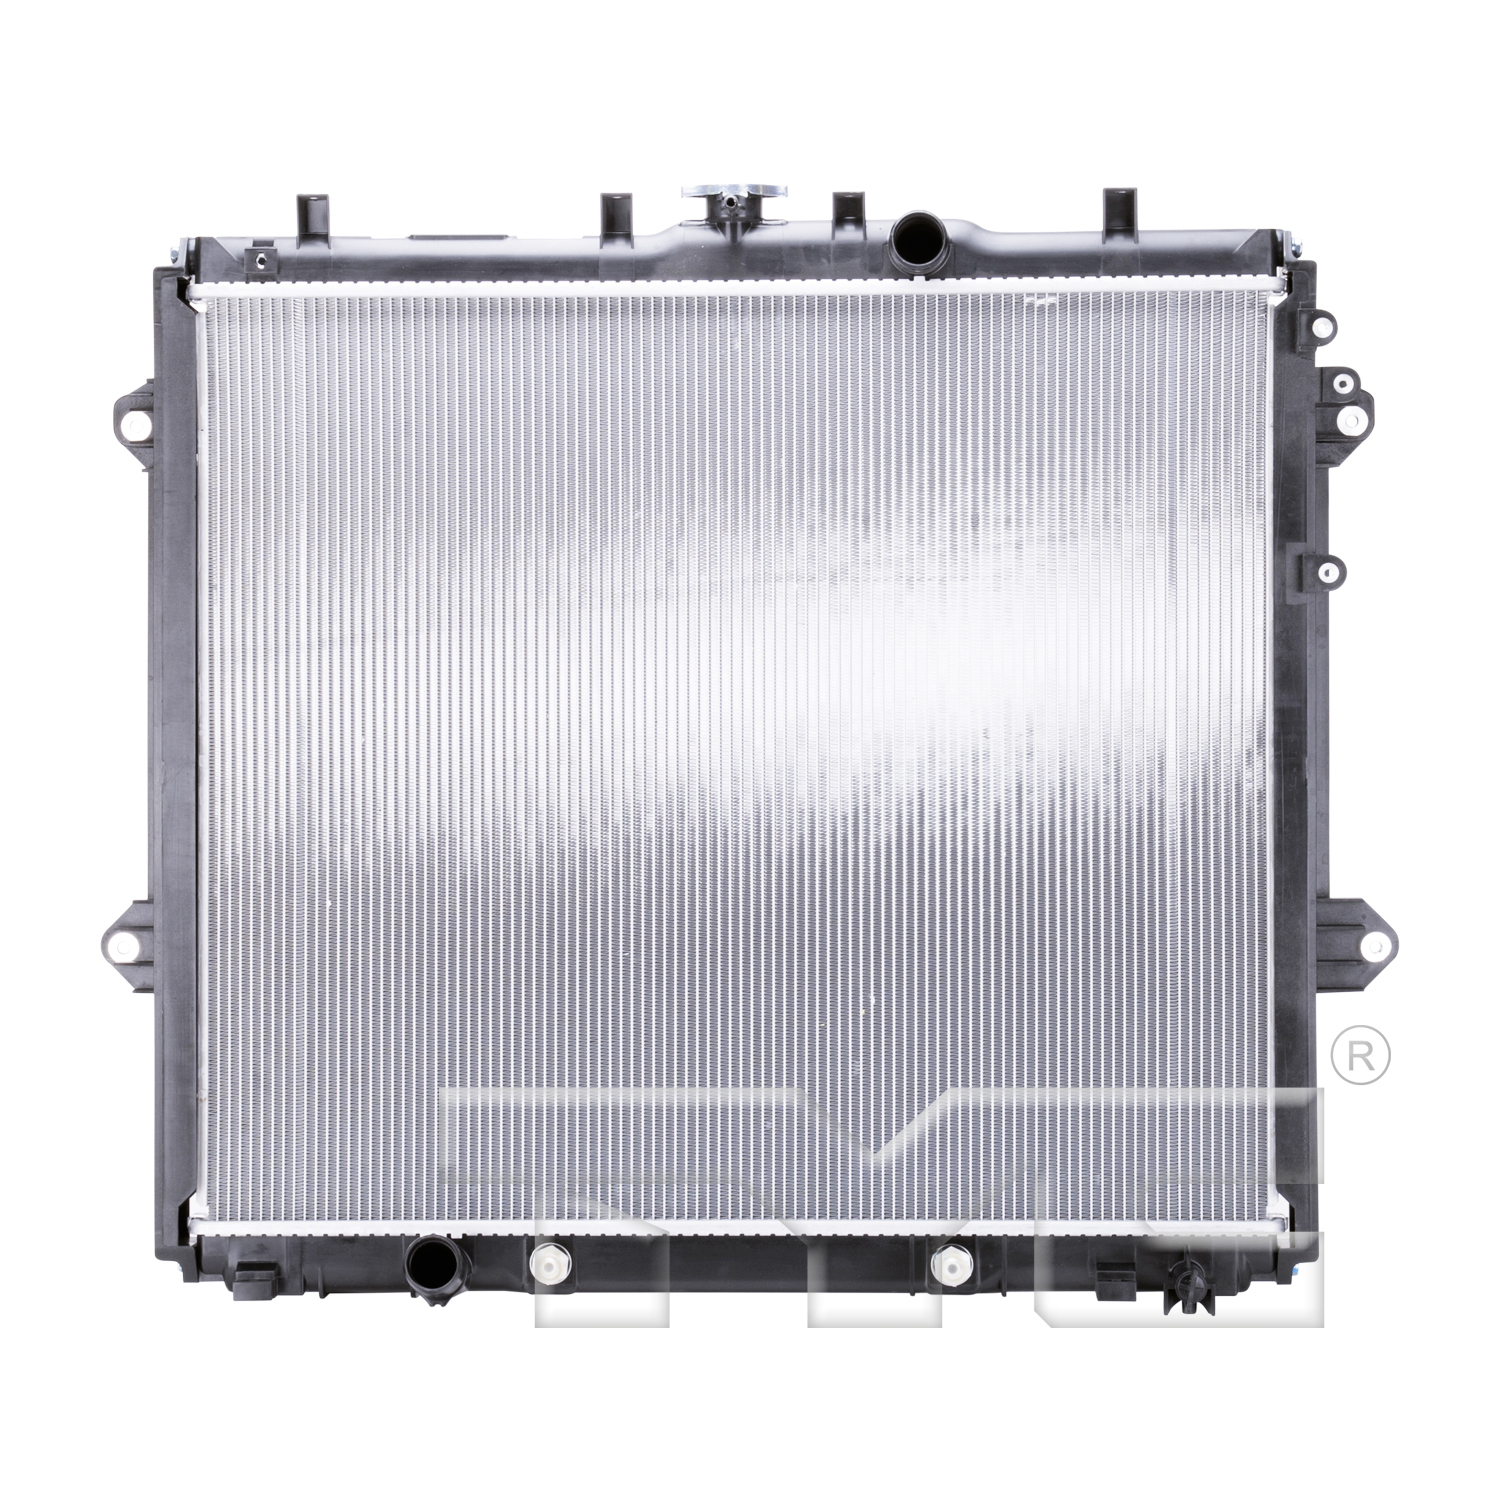 Aftermarket RADIATORS for VOLVO - S70, S70,98-98,Radiator assembly